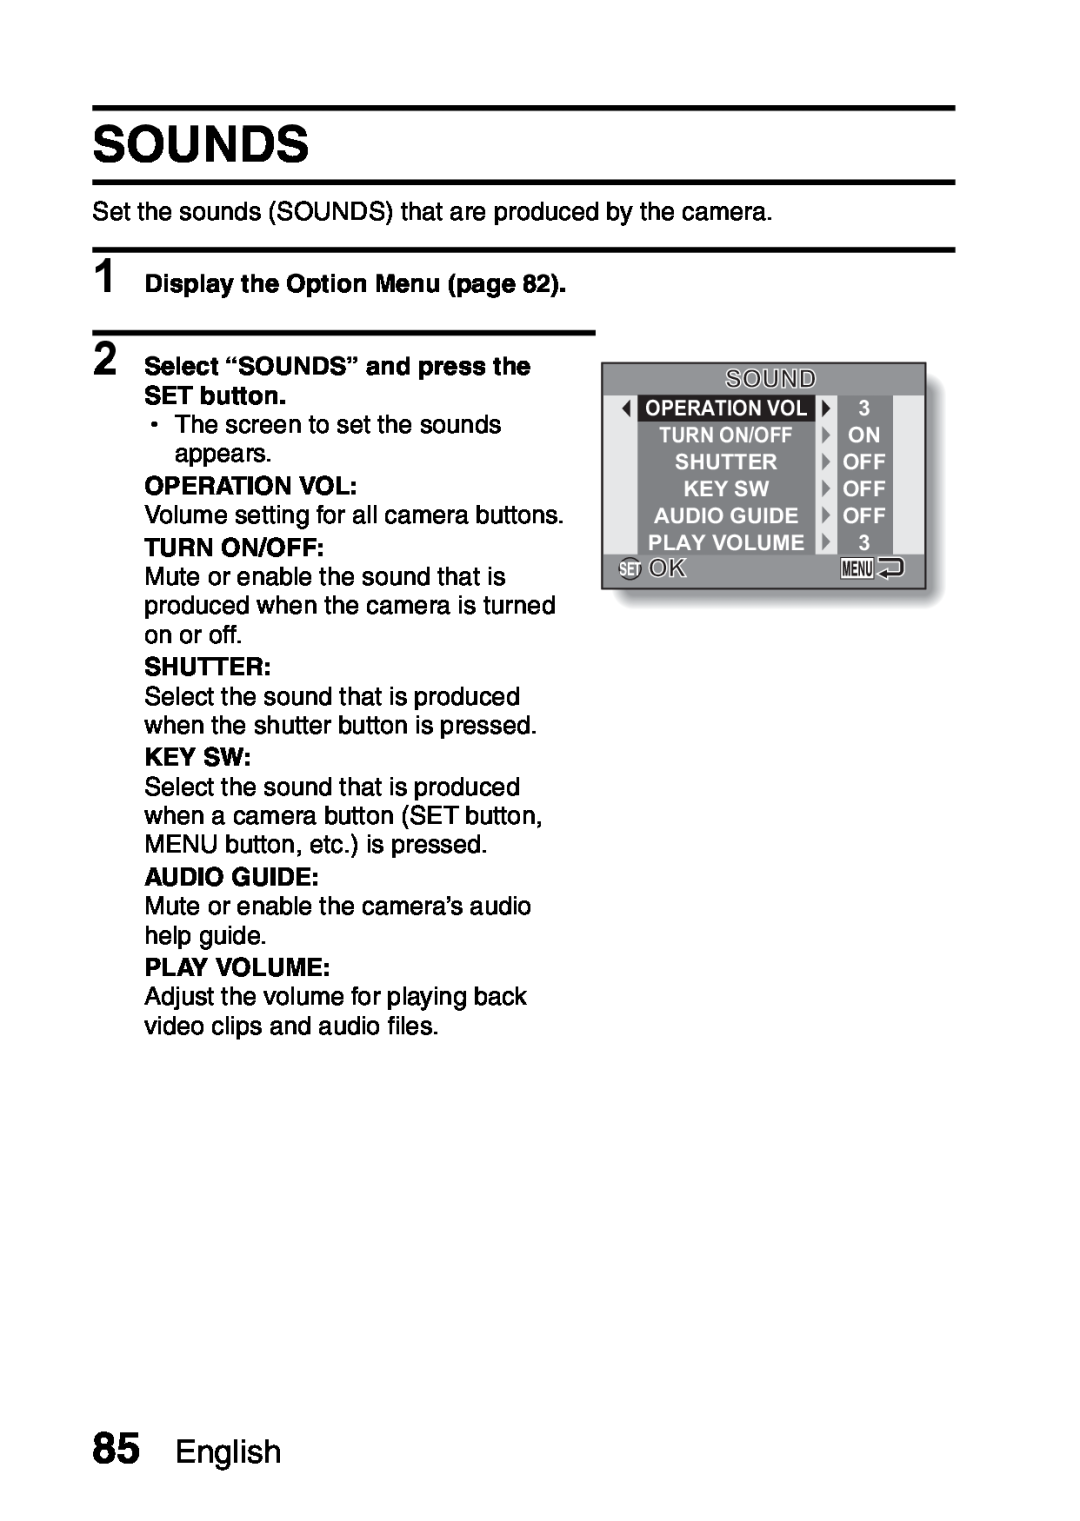 Sanyo VPC-S60 Sounds, English, Display the Option Menu page, Select “SOUNDS” and press the SET button, Operation Vol 